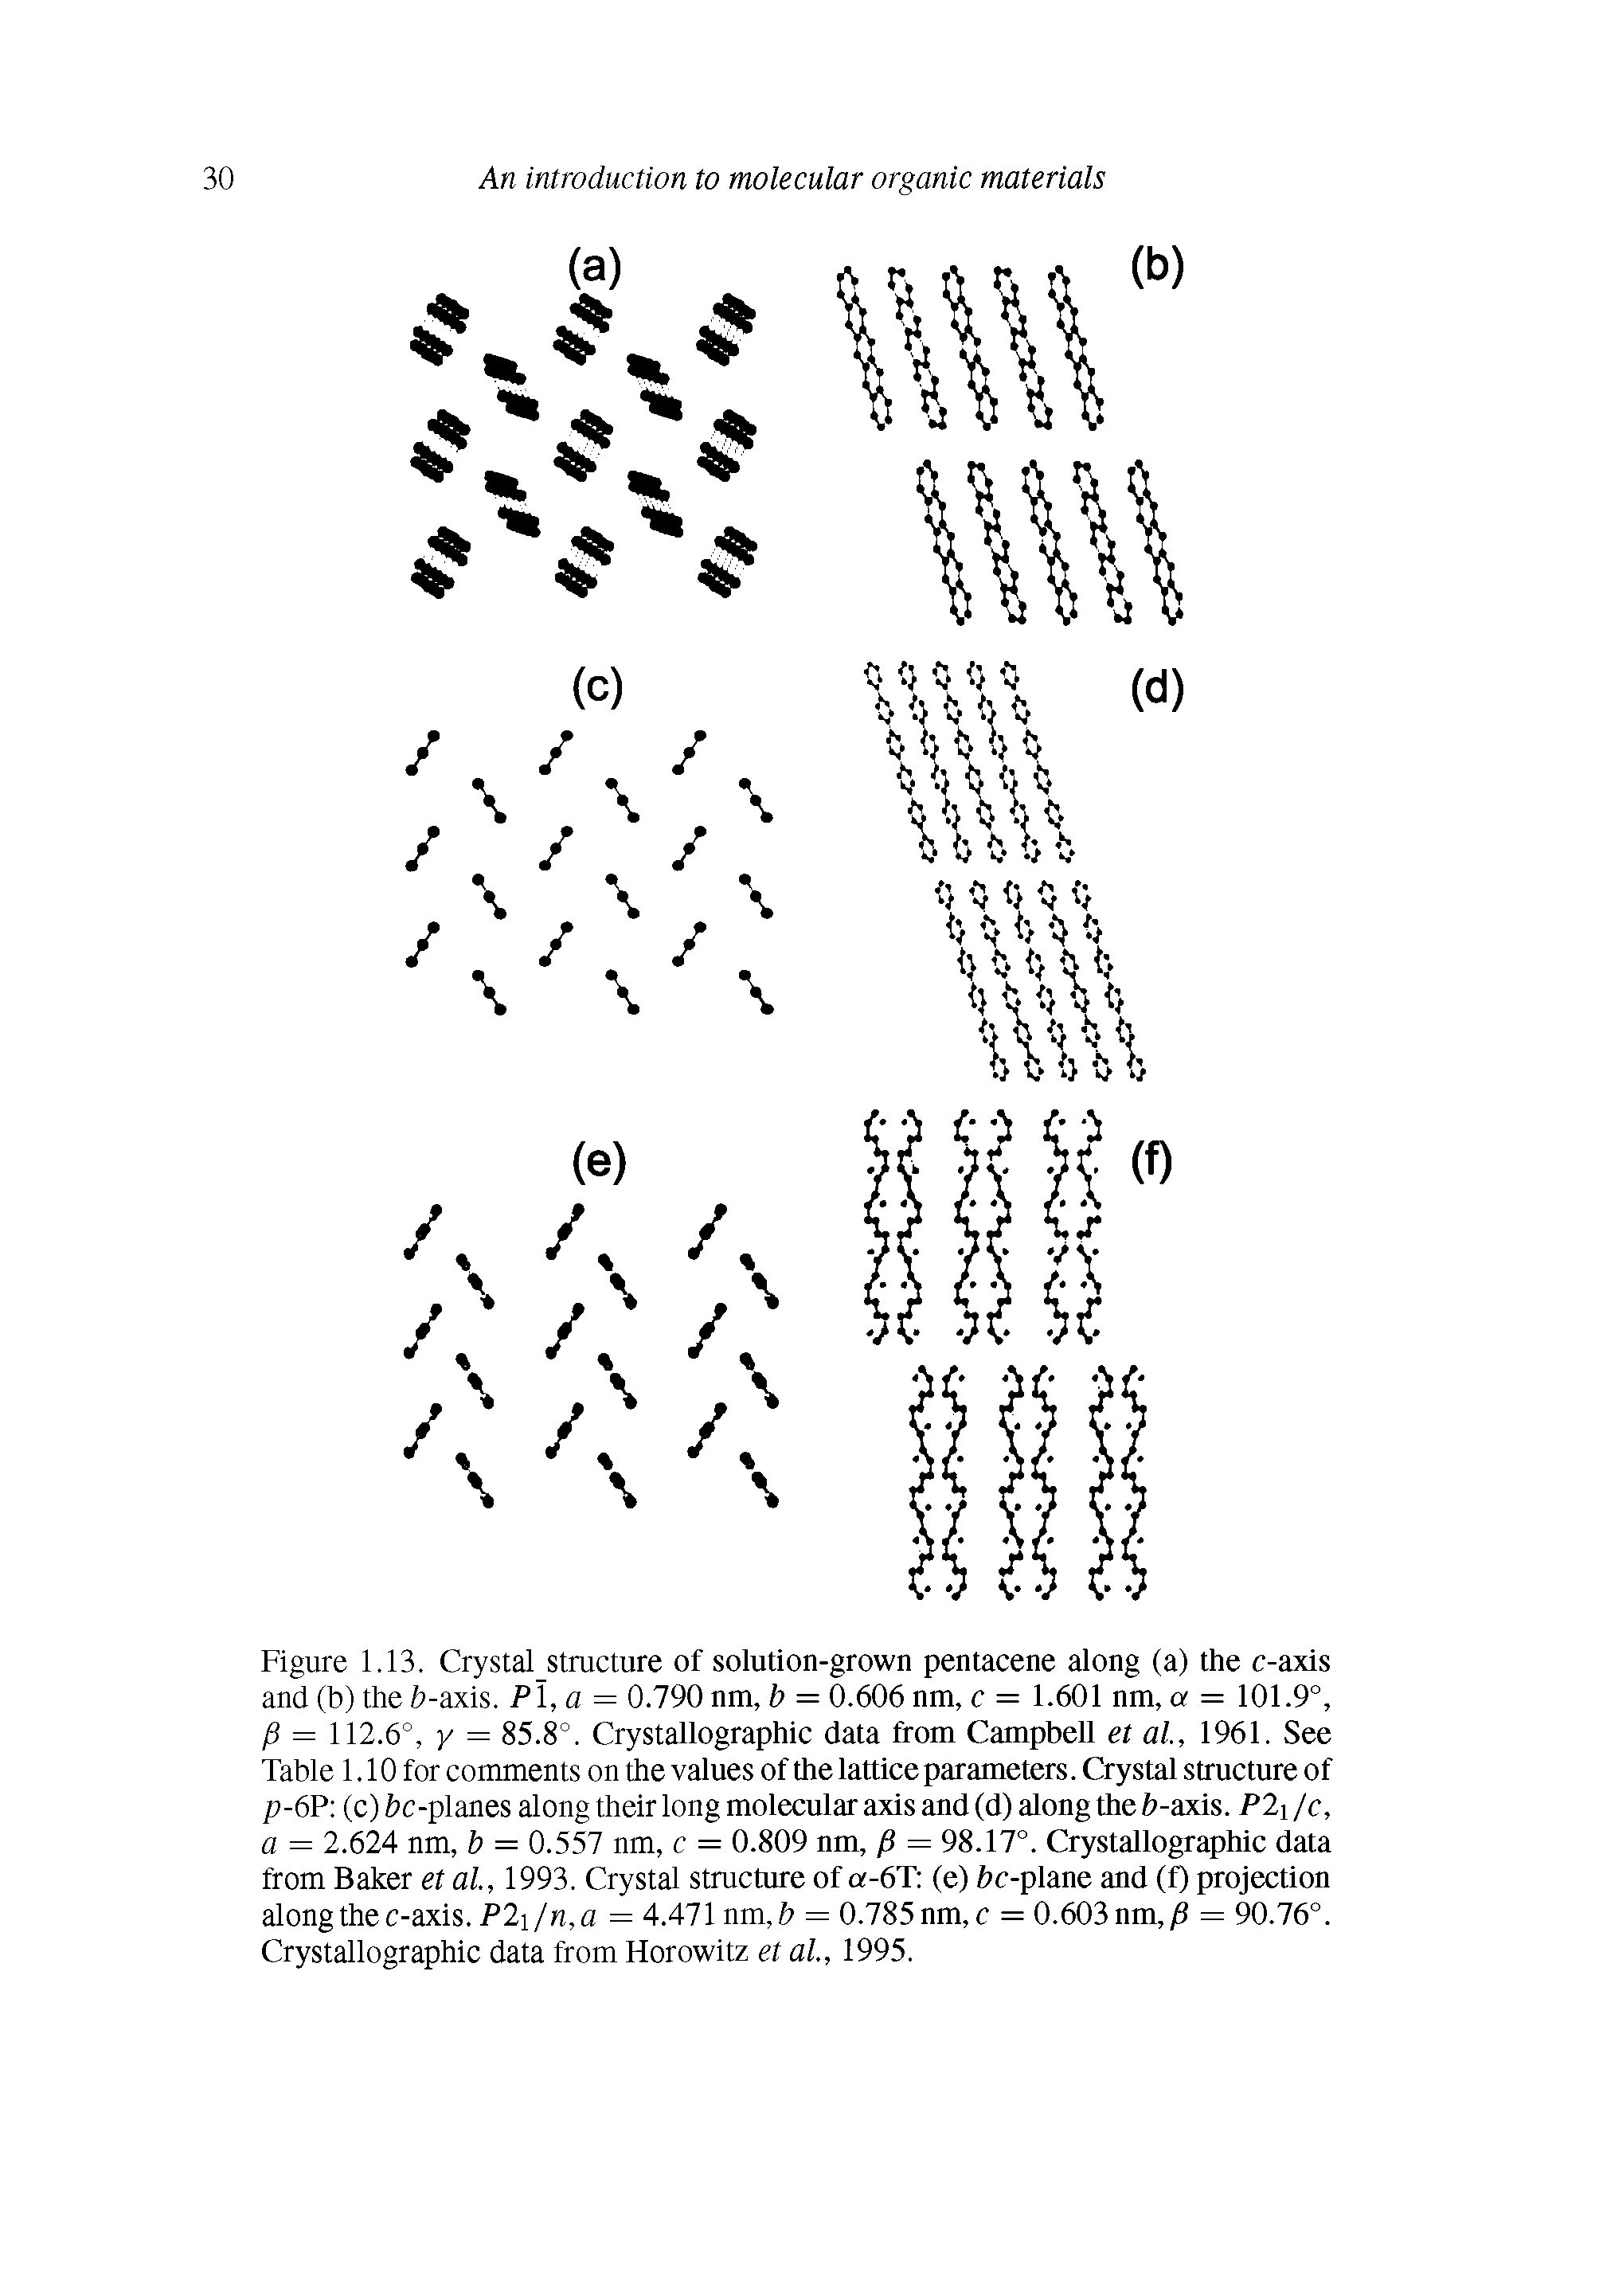 Figure 1.13. Crystal structure of solution-grown pentacene along (a) the c-axis and (b) the fe-axis. Pl,a = 0.790 nm, b = 0.606 nm, c = 1.601 nm, a = 101.9°, P = 112.6°, y = 85.8°. Crystallographic data from Campbell et al, 1961. See Table 1.10 for comments on the values of the lattice parameters. Crystal structure of p-6P (c) c-planes along their long molecular axis and (d) along the fe-axis. P2i /c, a = 2.624 nm, b = 0.557 nm, c = 0.809 nm, p = 98.17°. Crystallographic data from Baker et al, 1993. Crystal stmcture of o -6T (e) fee-plane and (f) projection along the c-axis. P2ifn,a = 4.471 nm,fe = 0.785 nm,c = 0.603 nm,jS = 90.76°. Crystallographic data from Horowitz et al, 1995.